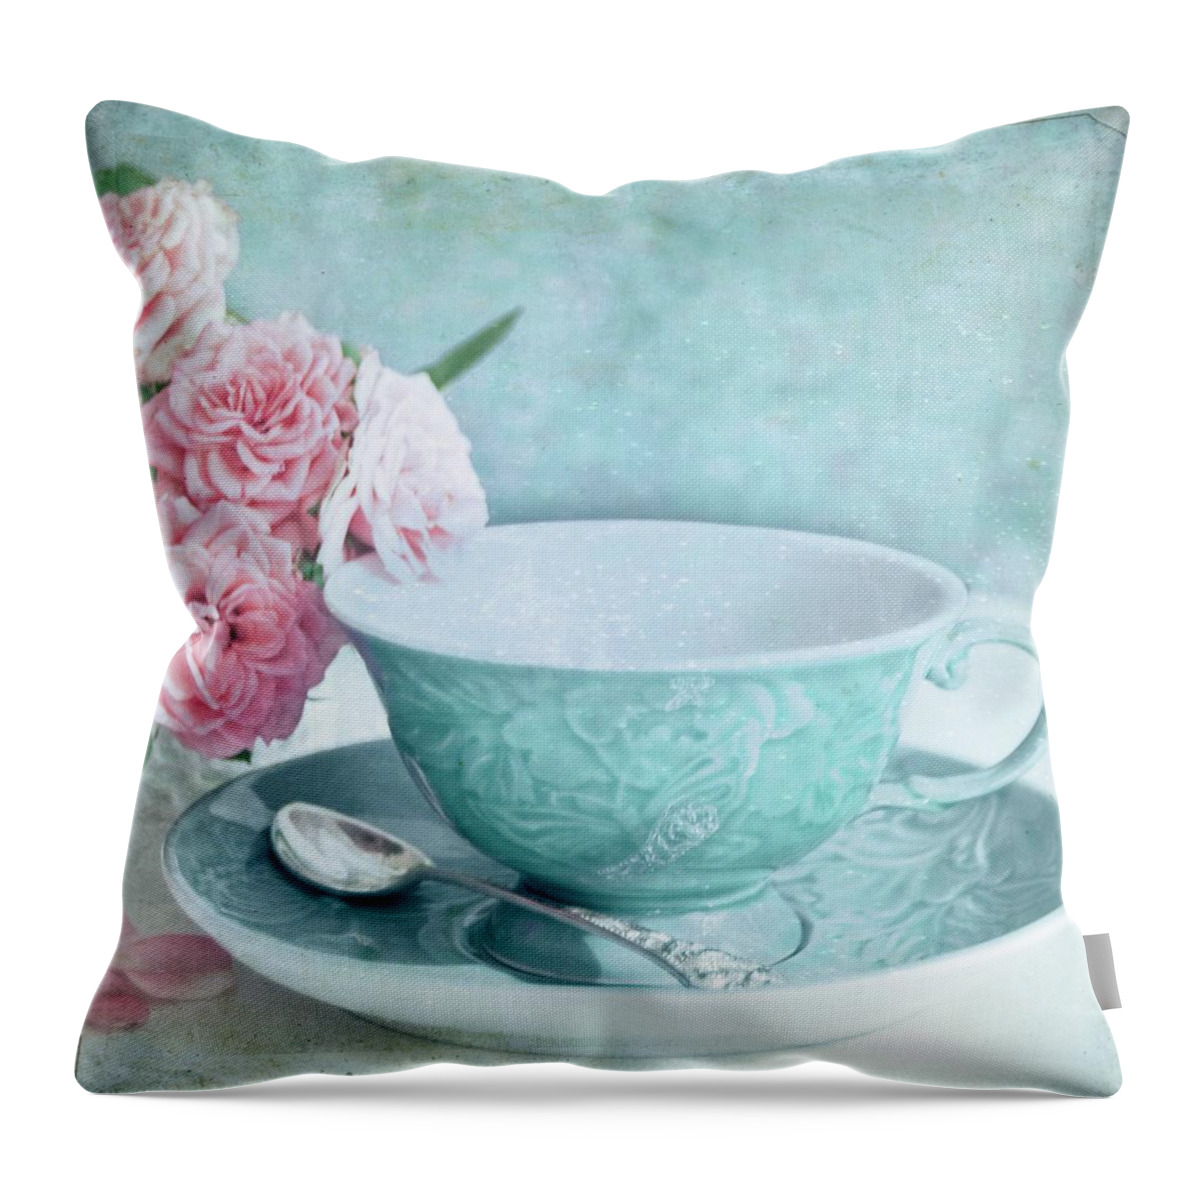 Empty Throw Pillow featuring the photograph Tea Cup And Roses by Sonia Martin Fotografias - Www.aquesabenlasnubes.com